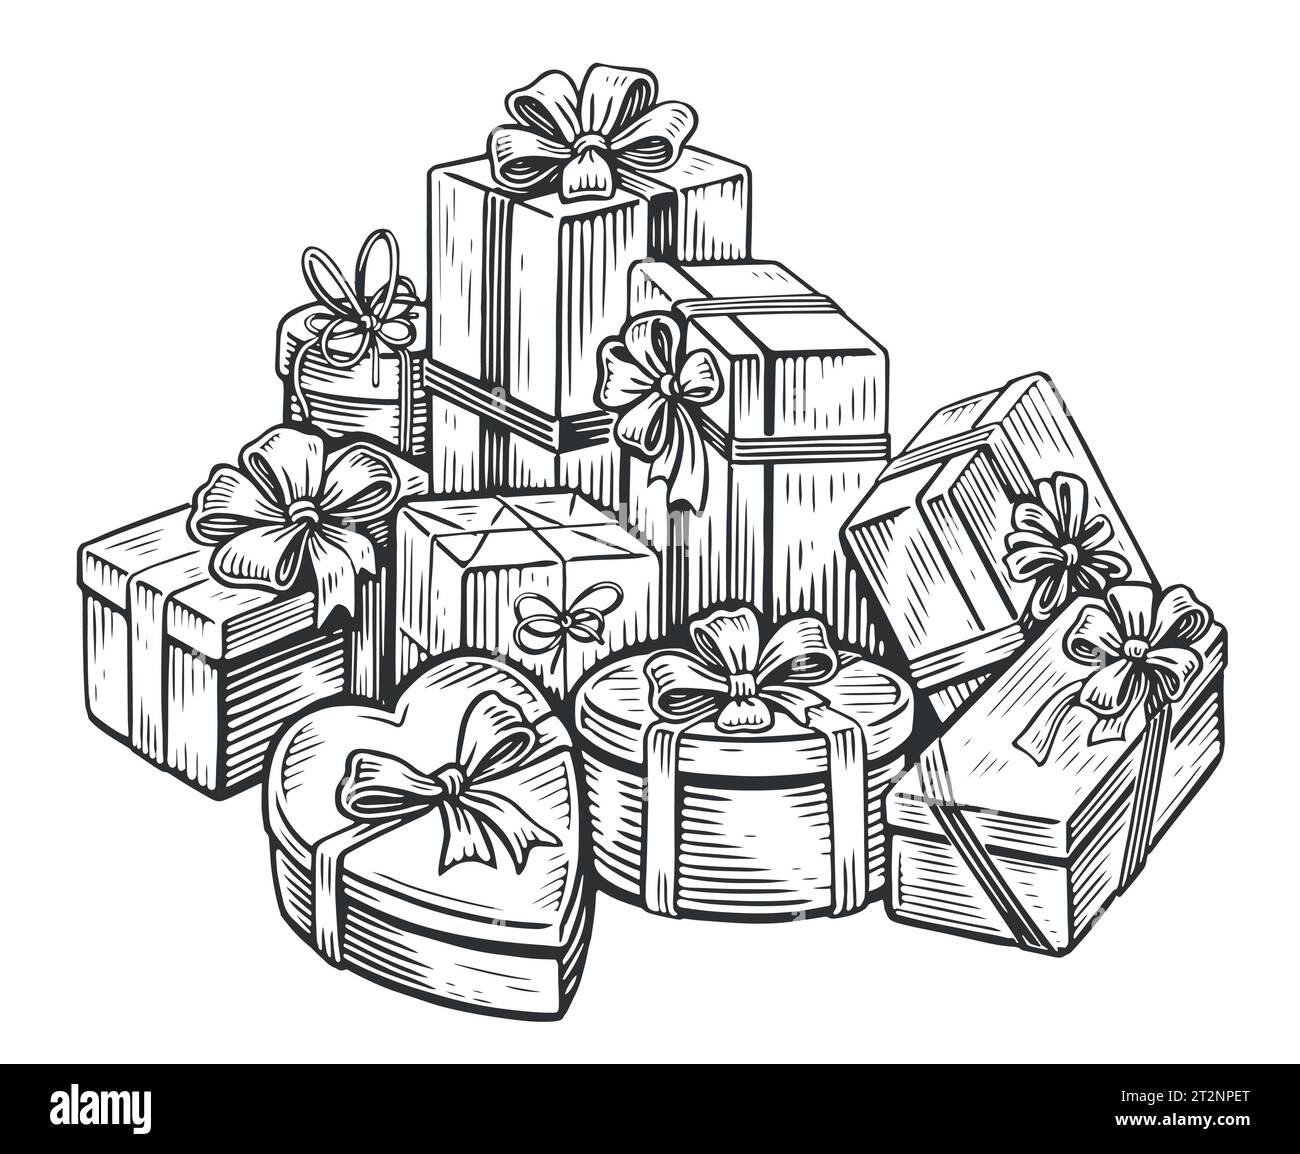 Big pile of gift boxes in festive wrapping paper with ribbon and bows. Holiday and Christmas Gifts. Sketch vector Stock Vector